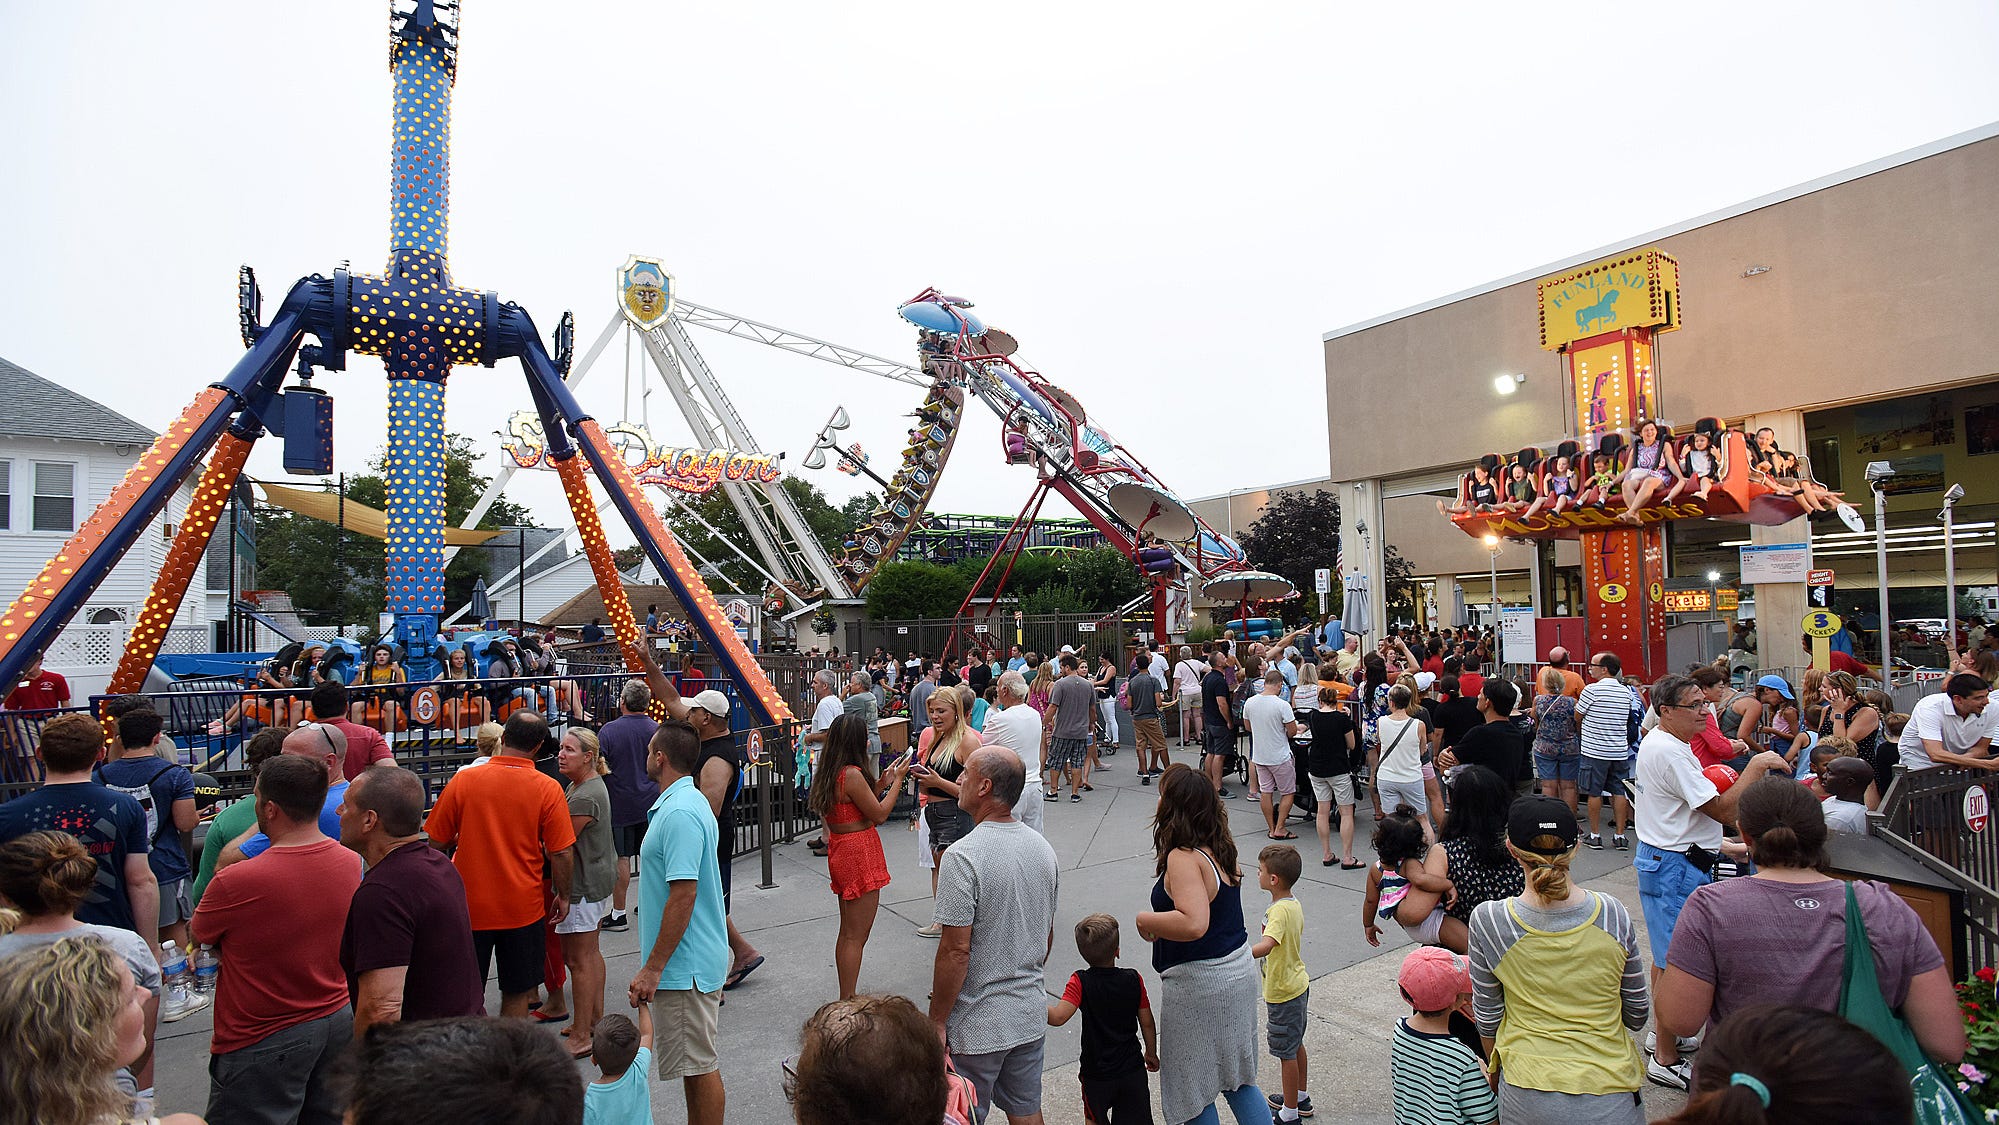 Delaware's Funland reopens with modifications due to COVID19 pandemic